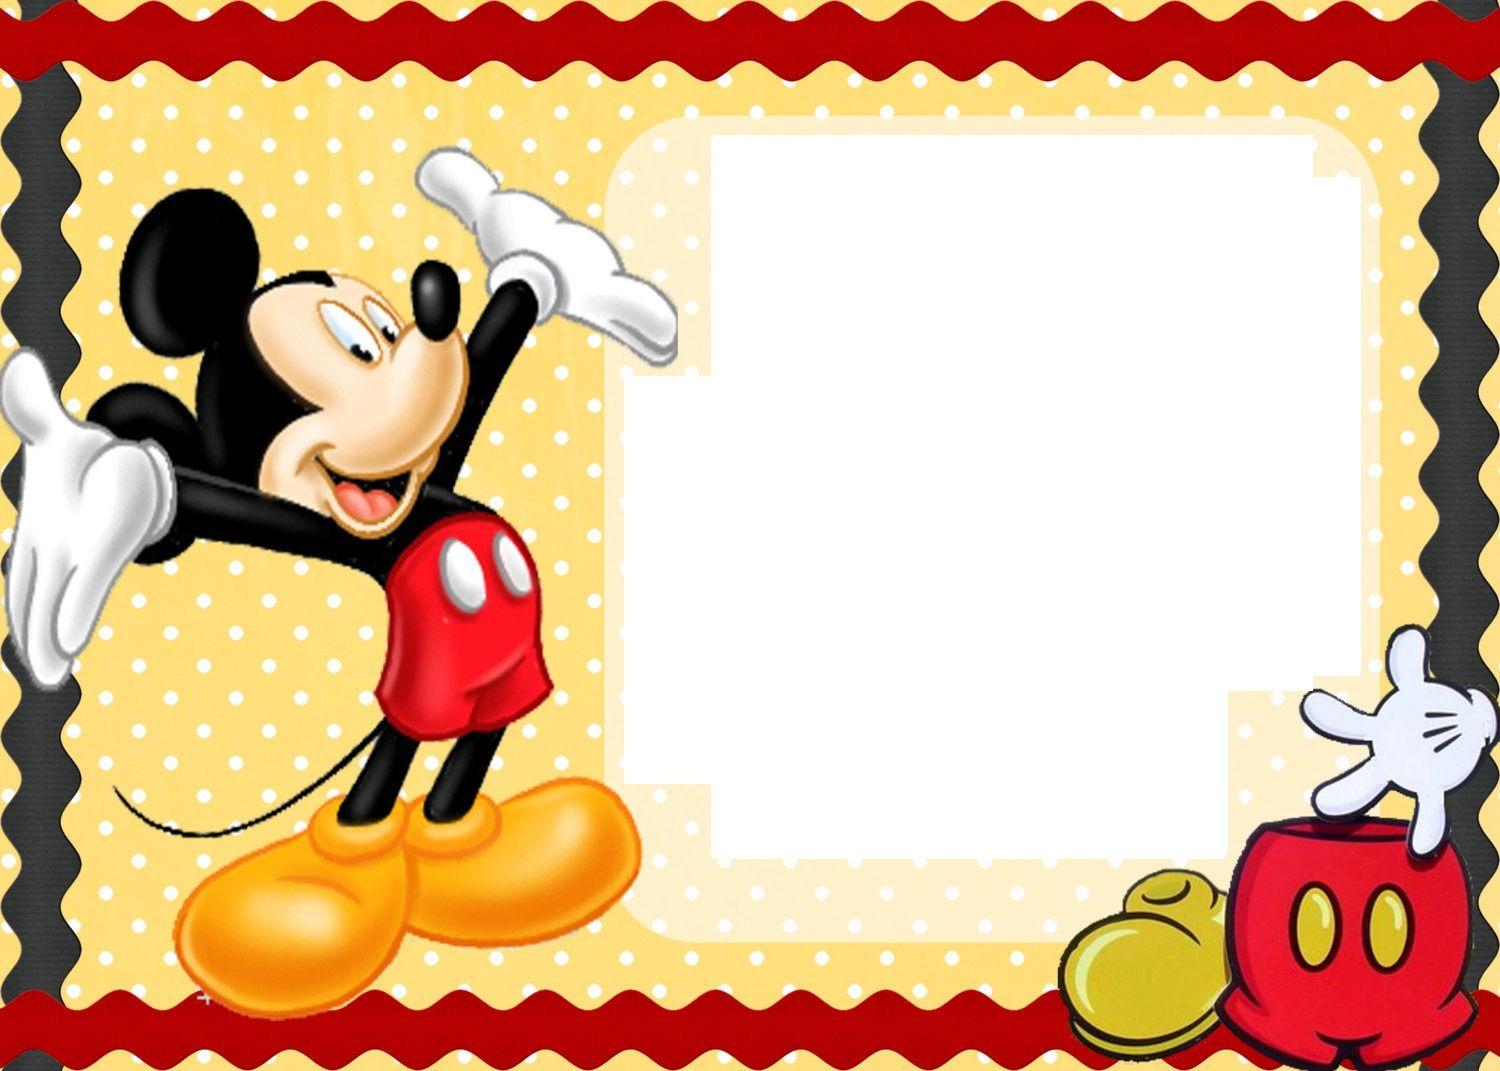 Mickey Mouse Frame Wallpaper High Quality